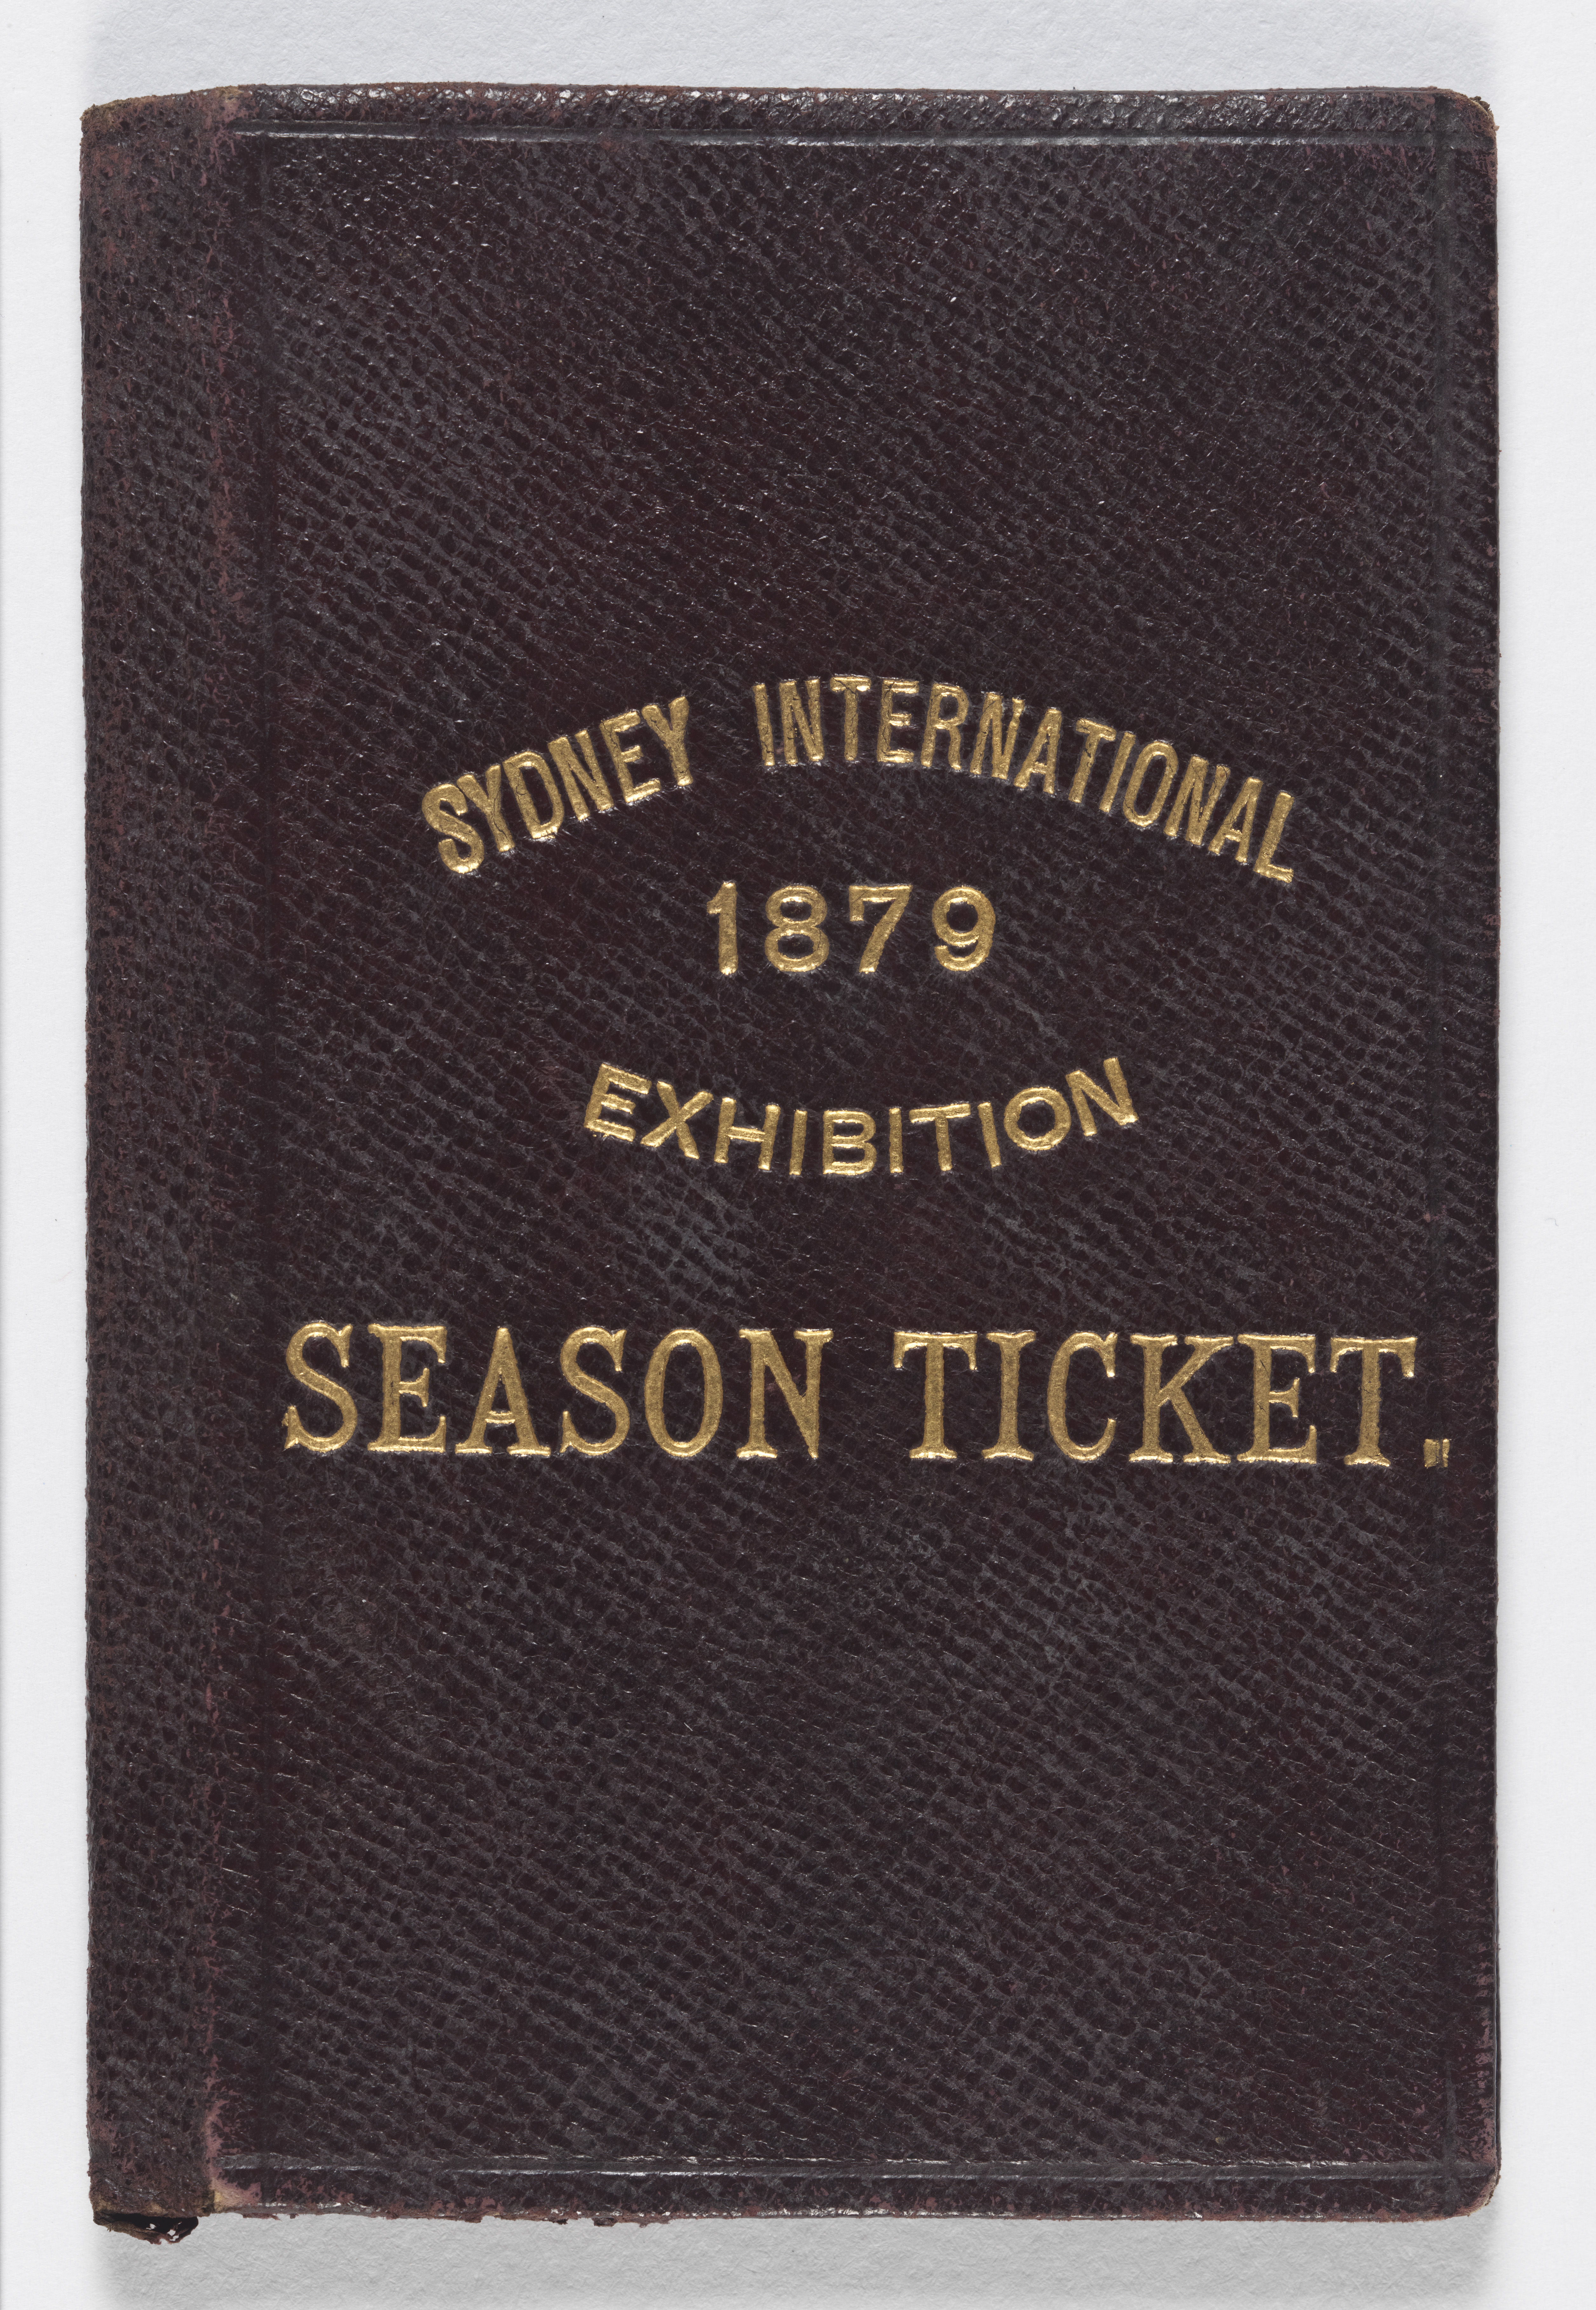 Wallet for season ticket issued to Eveline Mary Whiting for the International Exhibition